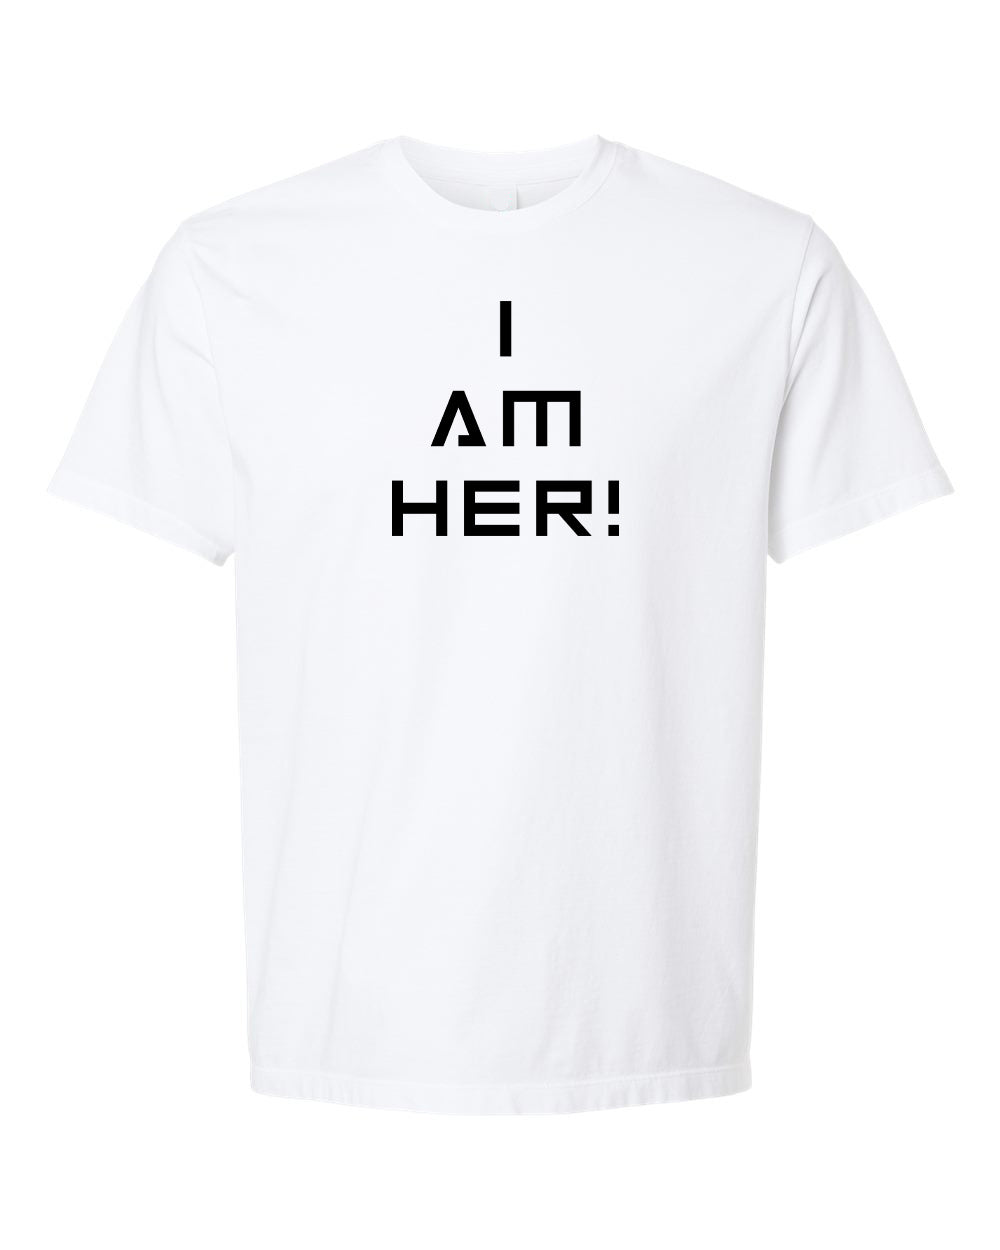 "I AM HER!" Youth Tee (color options available)